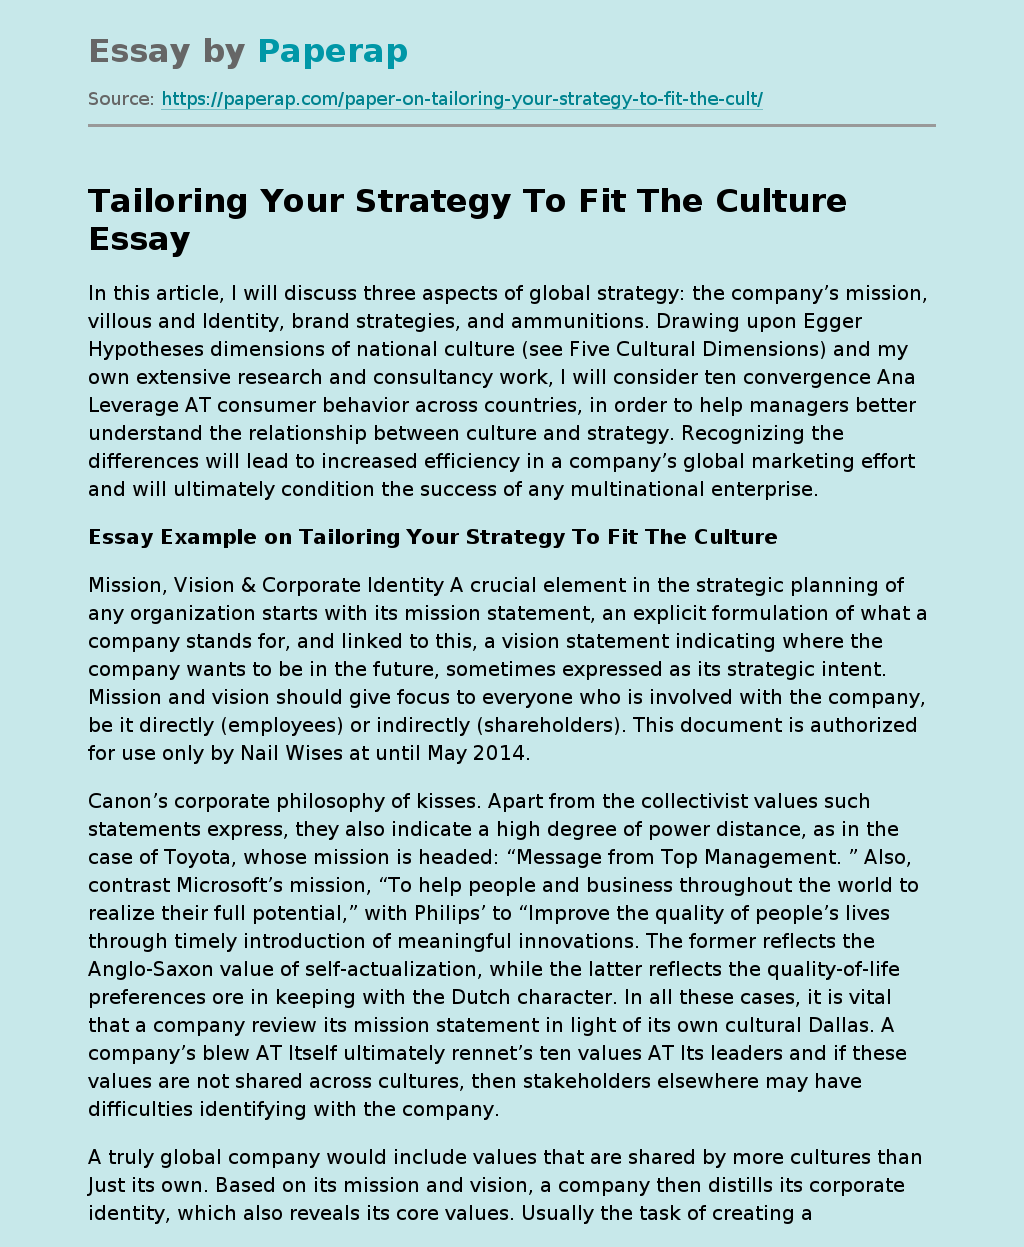 Tailoring Your Strategy To Fit The Culture